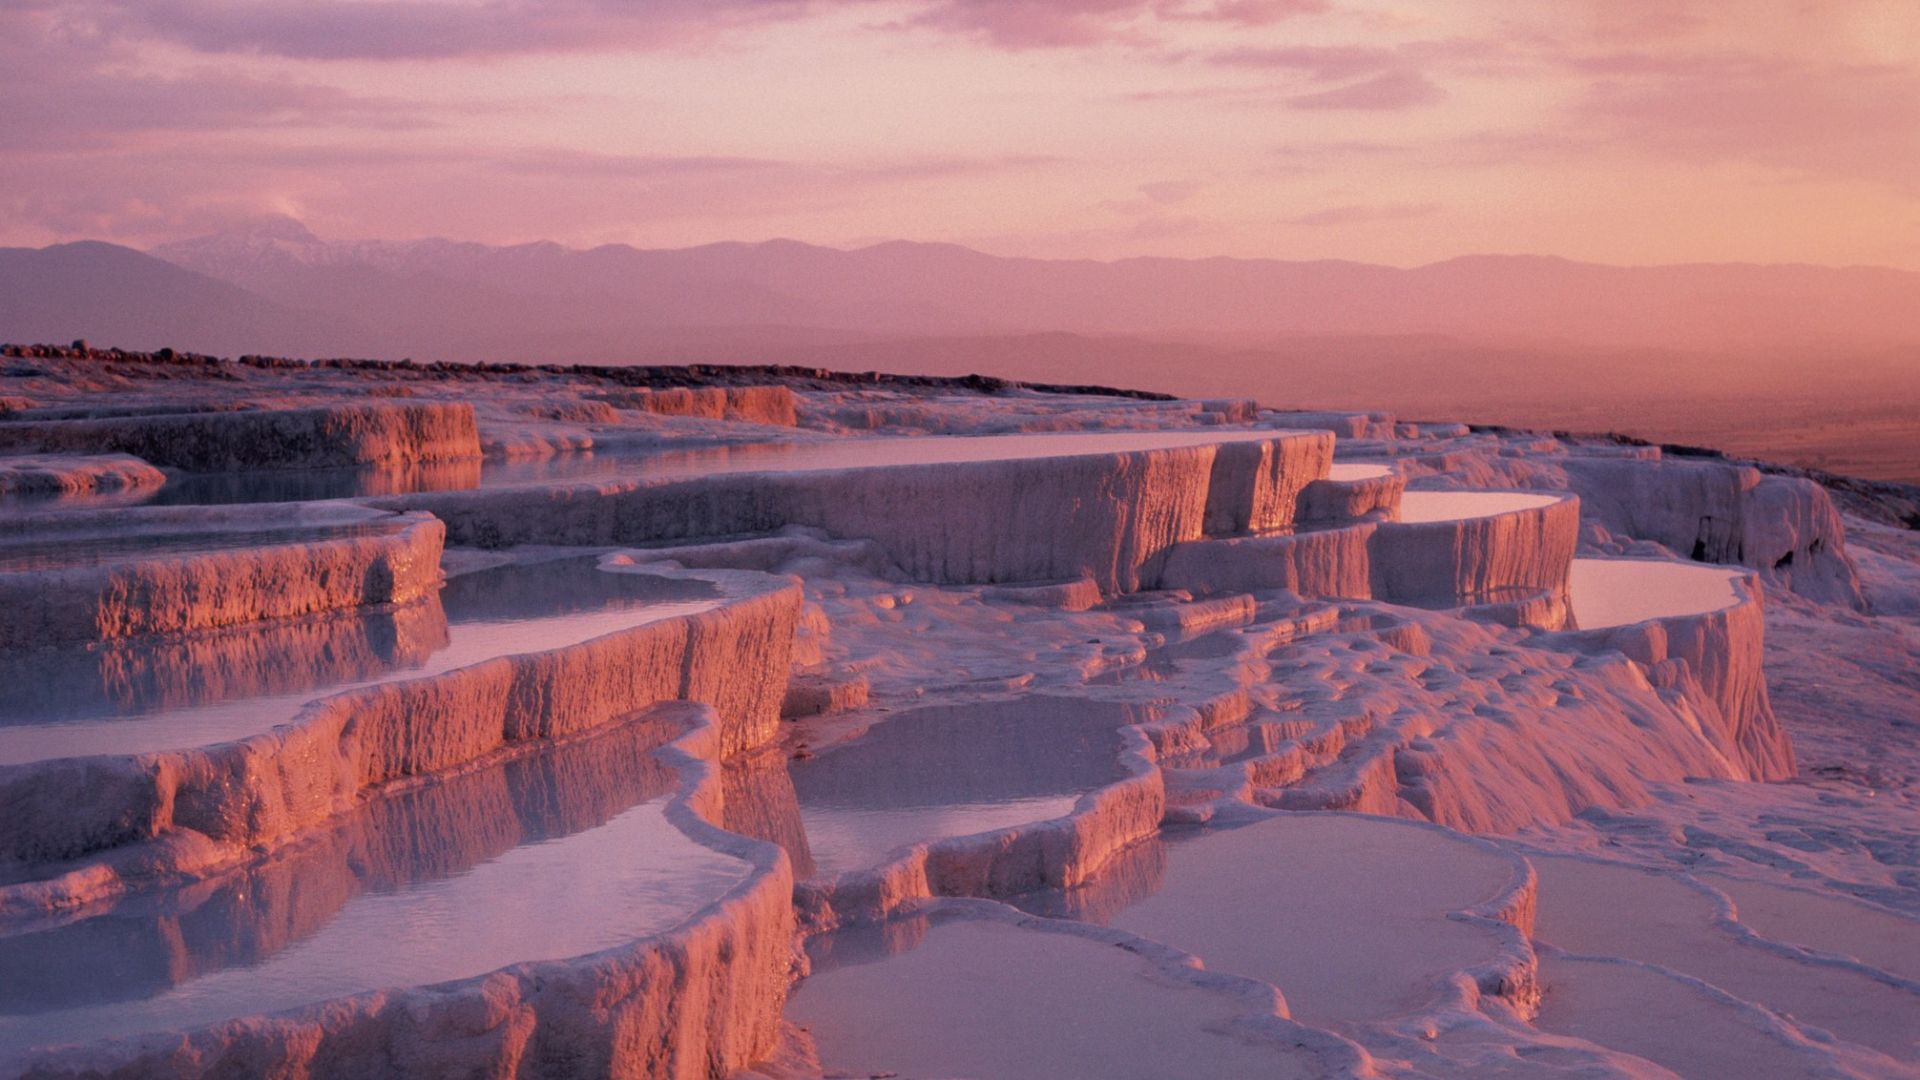 <p>                     Pamukkale, known as the "Cotton Castle" of Turkey, is a serene landscape dotted with mineral pools surrounded by white "cotton-like" shelves and ridges.                    </p>                                      <p>                     The unique landscape was created when a spring with a high concentration of calcium bicarbonate spilled over the edge of a cliff and cascaded down the side. The water leaves behind the white calcium deposits we see today, according to the Republic of Turkey Ministry of Culture and Tourism.                    </p>                                      <p>                     Tourists from far and wide flock to Pamukkale to relax in the calm waters and the myriad spas that have sprung up across the region.                    </p>